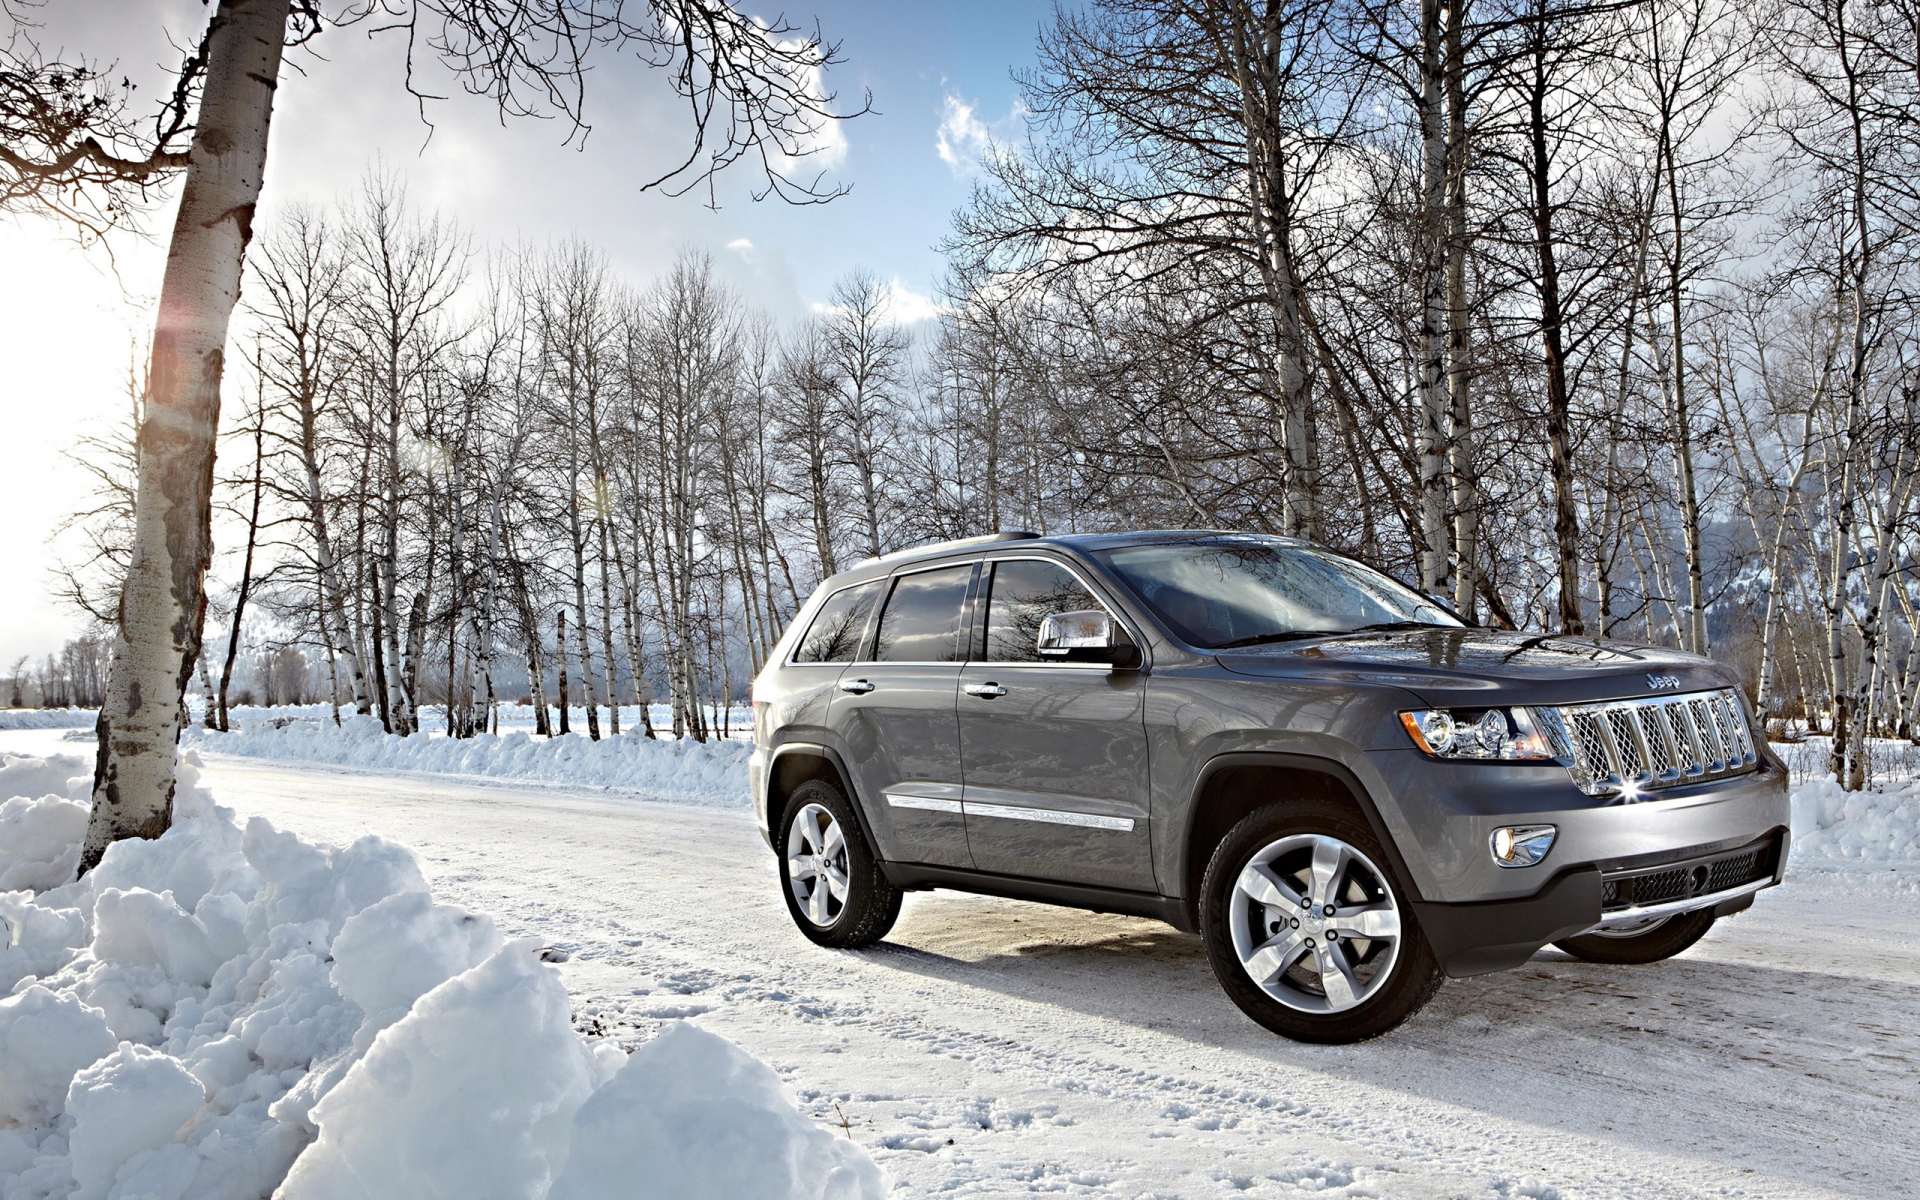 2012 Jeep Grand Cherokee for 1920 x 1200 widescreen resolution